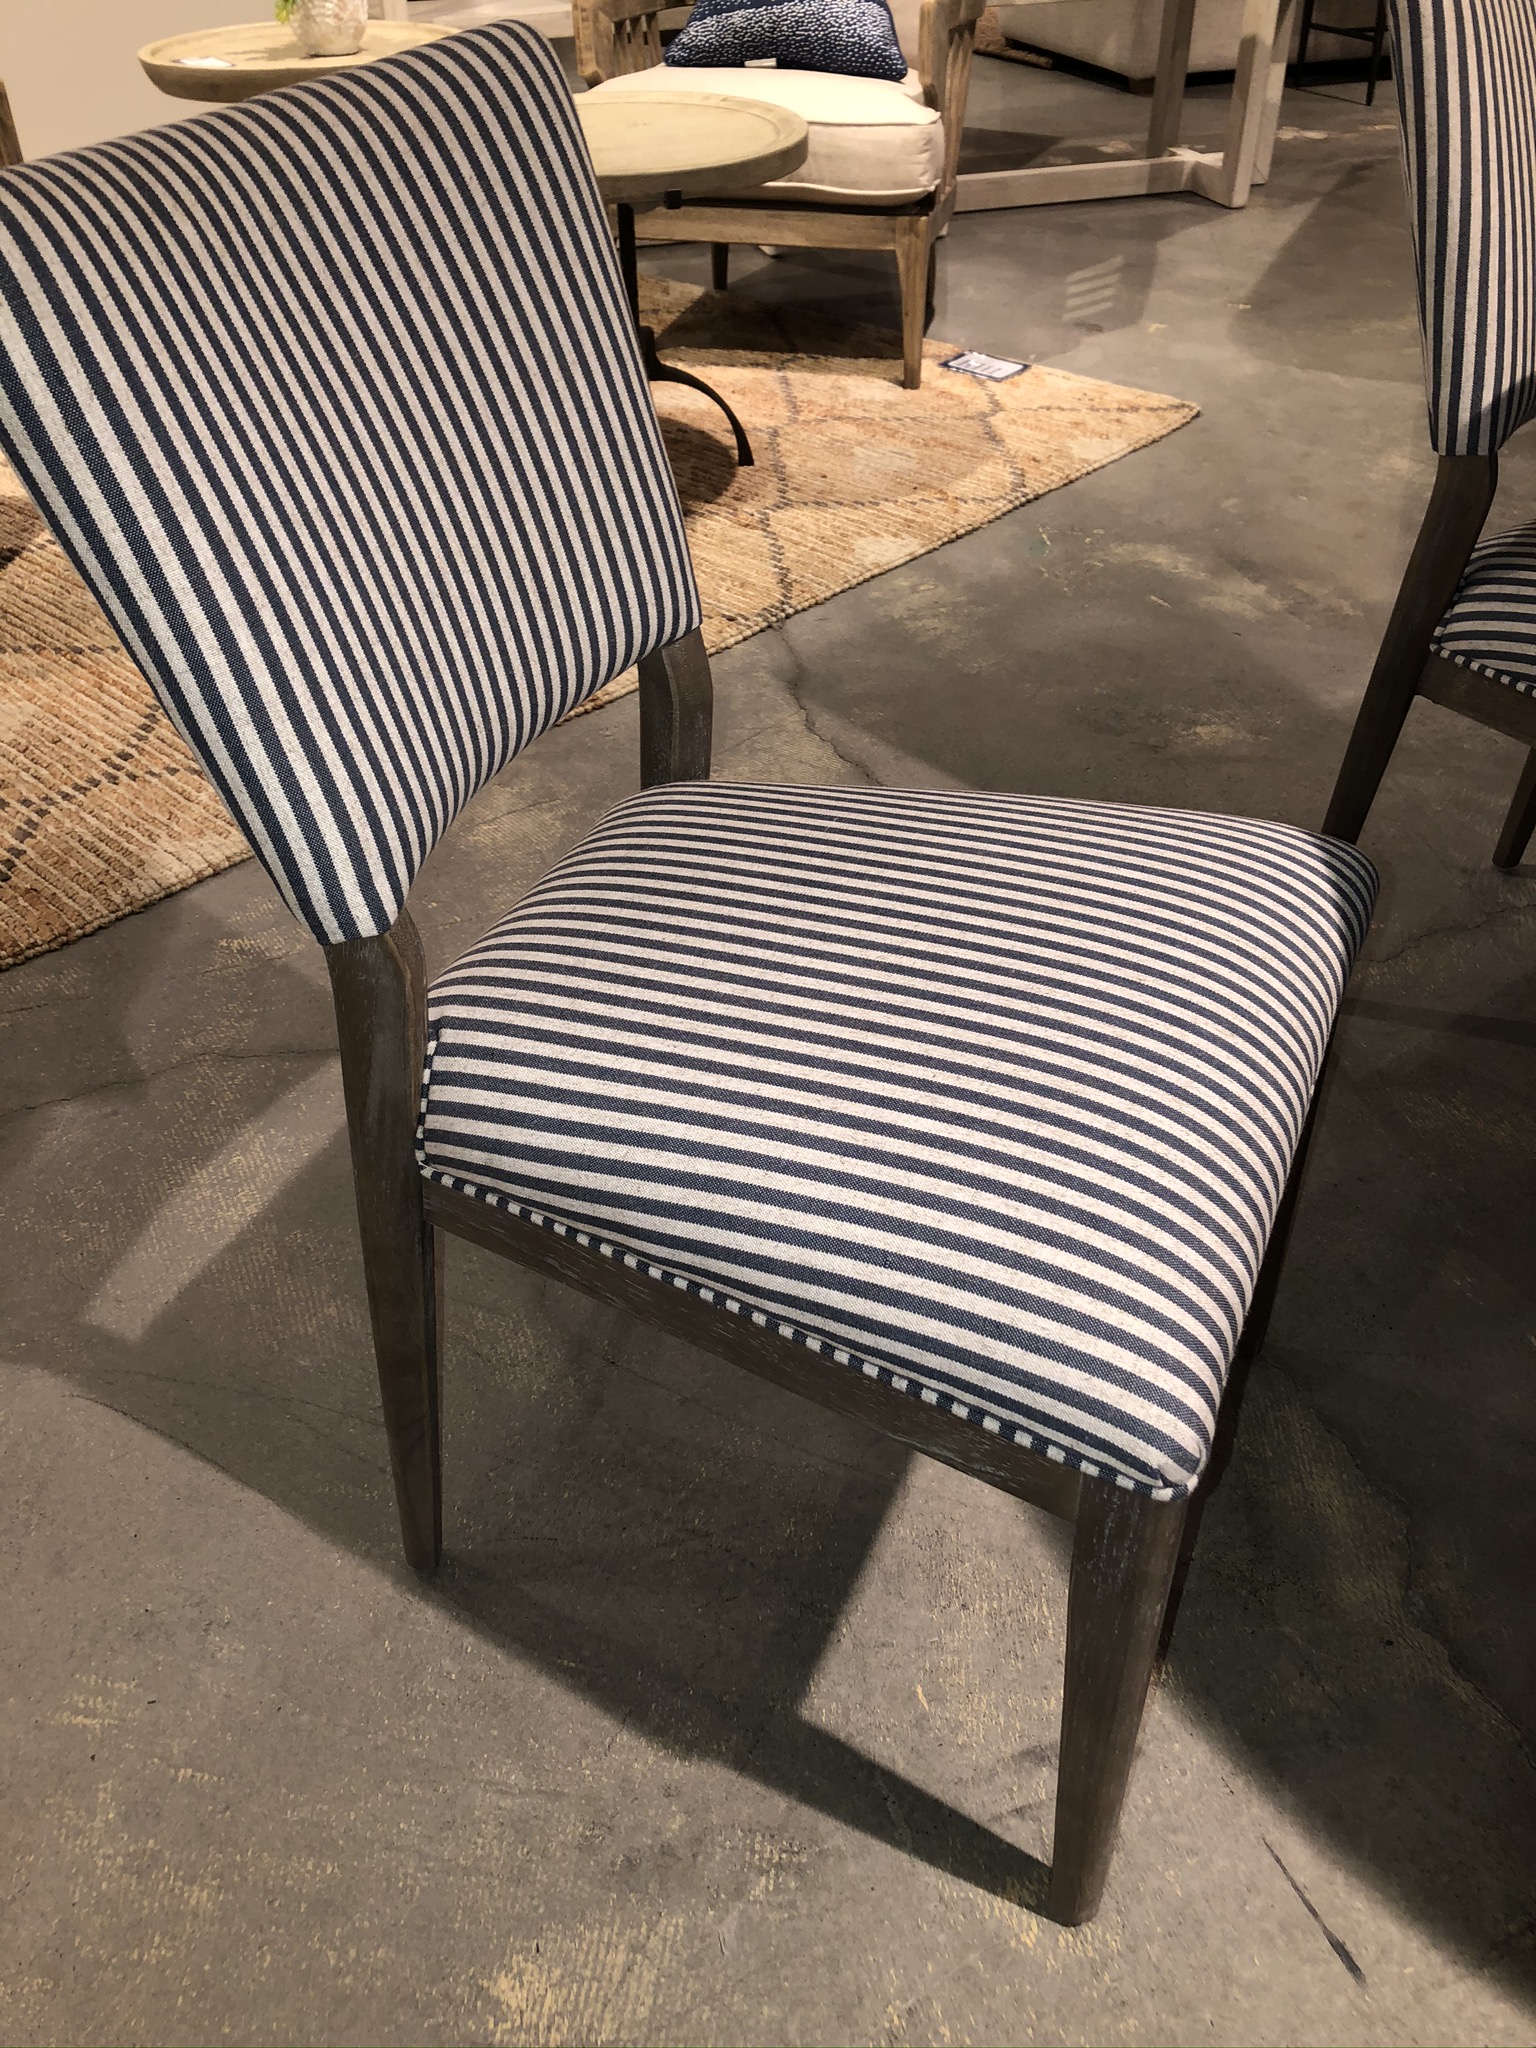 Blue and White Striped Upholstered Dining Chair - Mecox Gardens